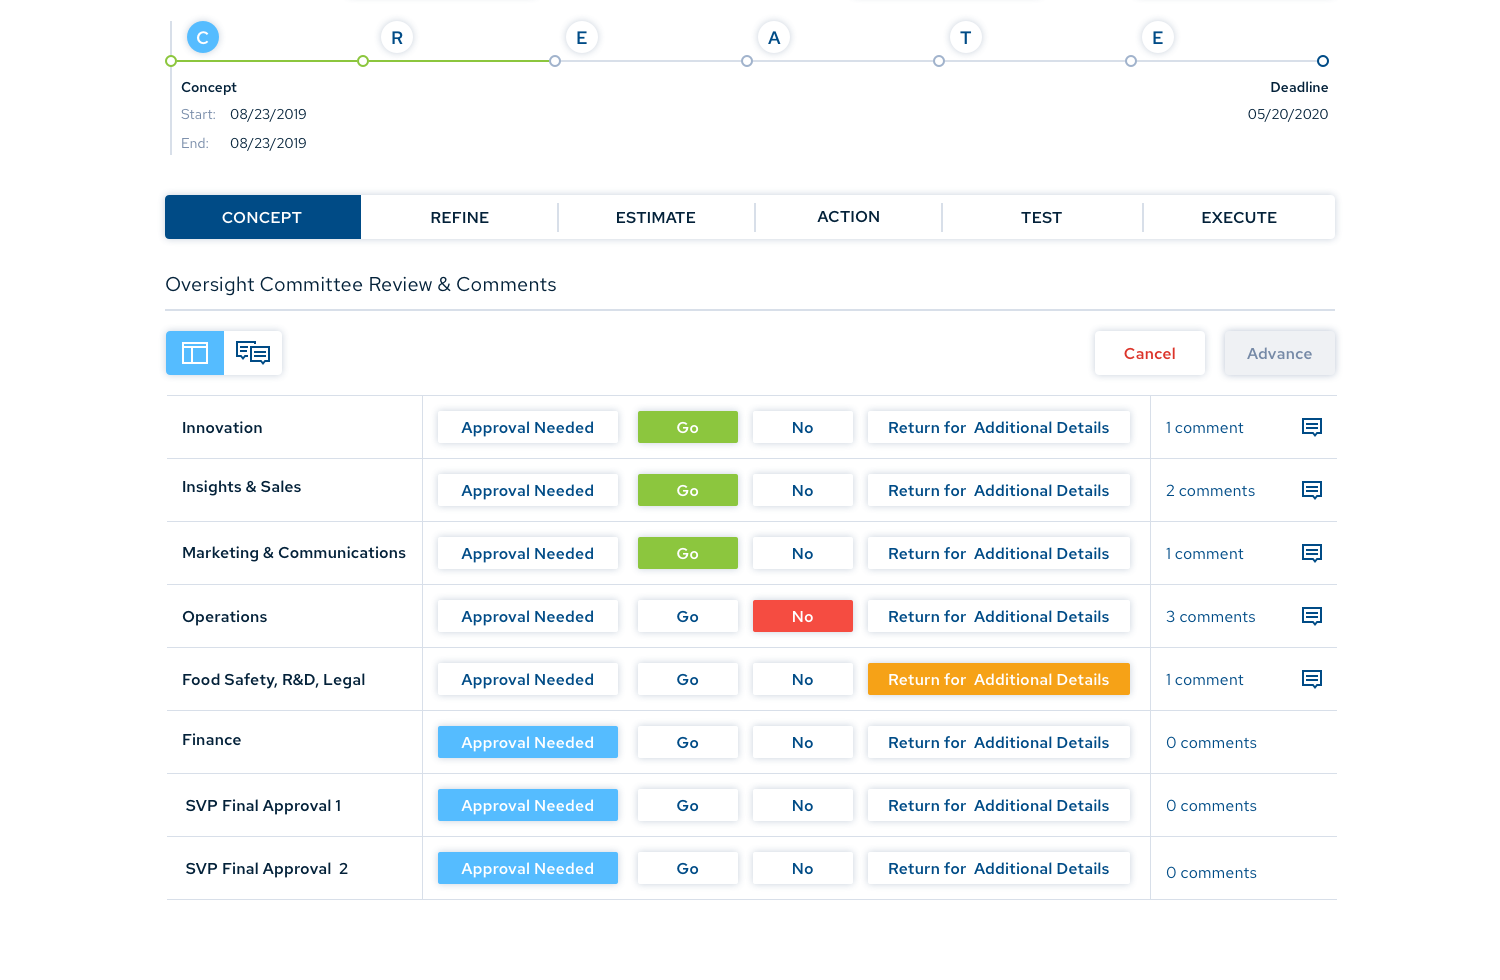 The Farm project management tool review and comments view